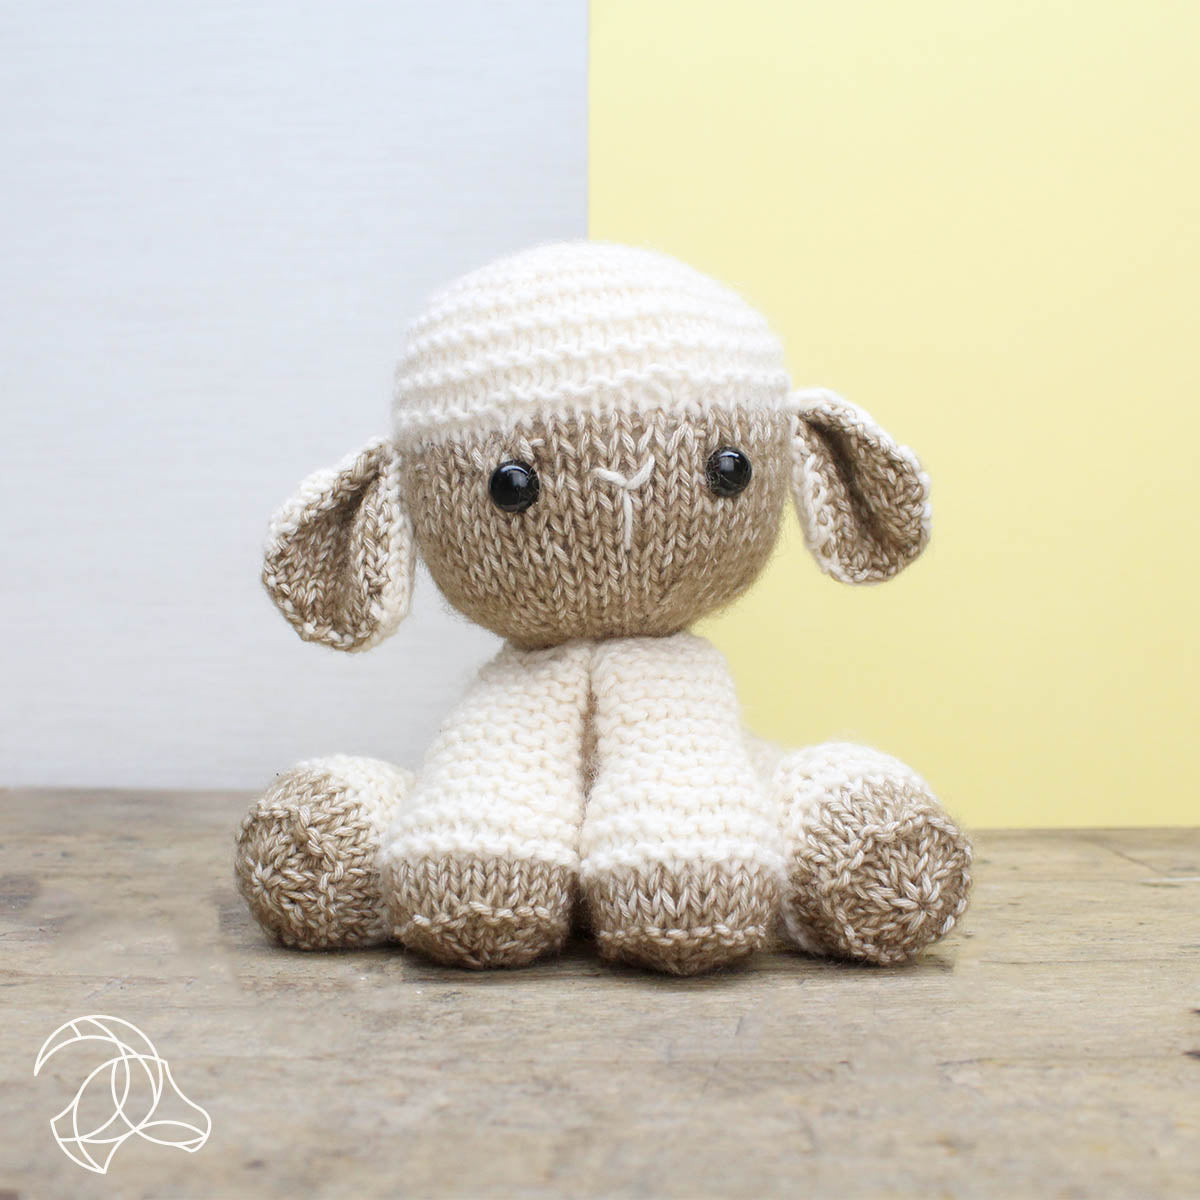 Lore the Little Lamb - Spring Knitting Kit from Hardicraft